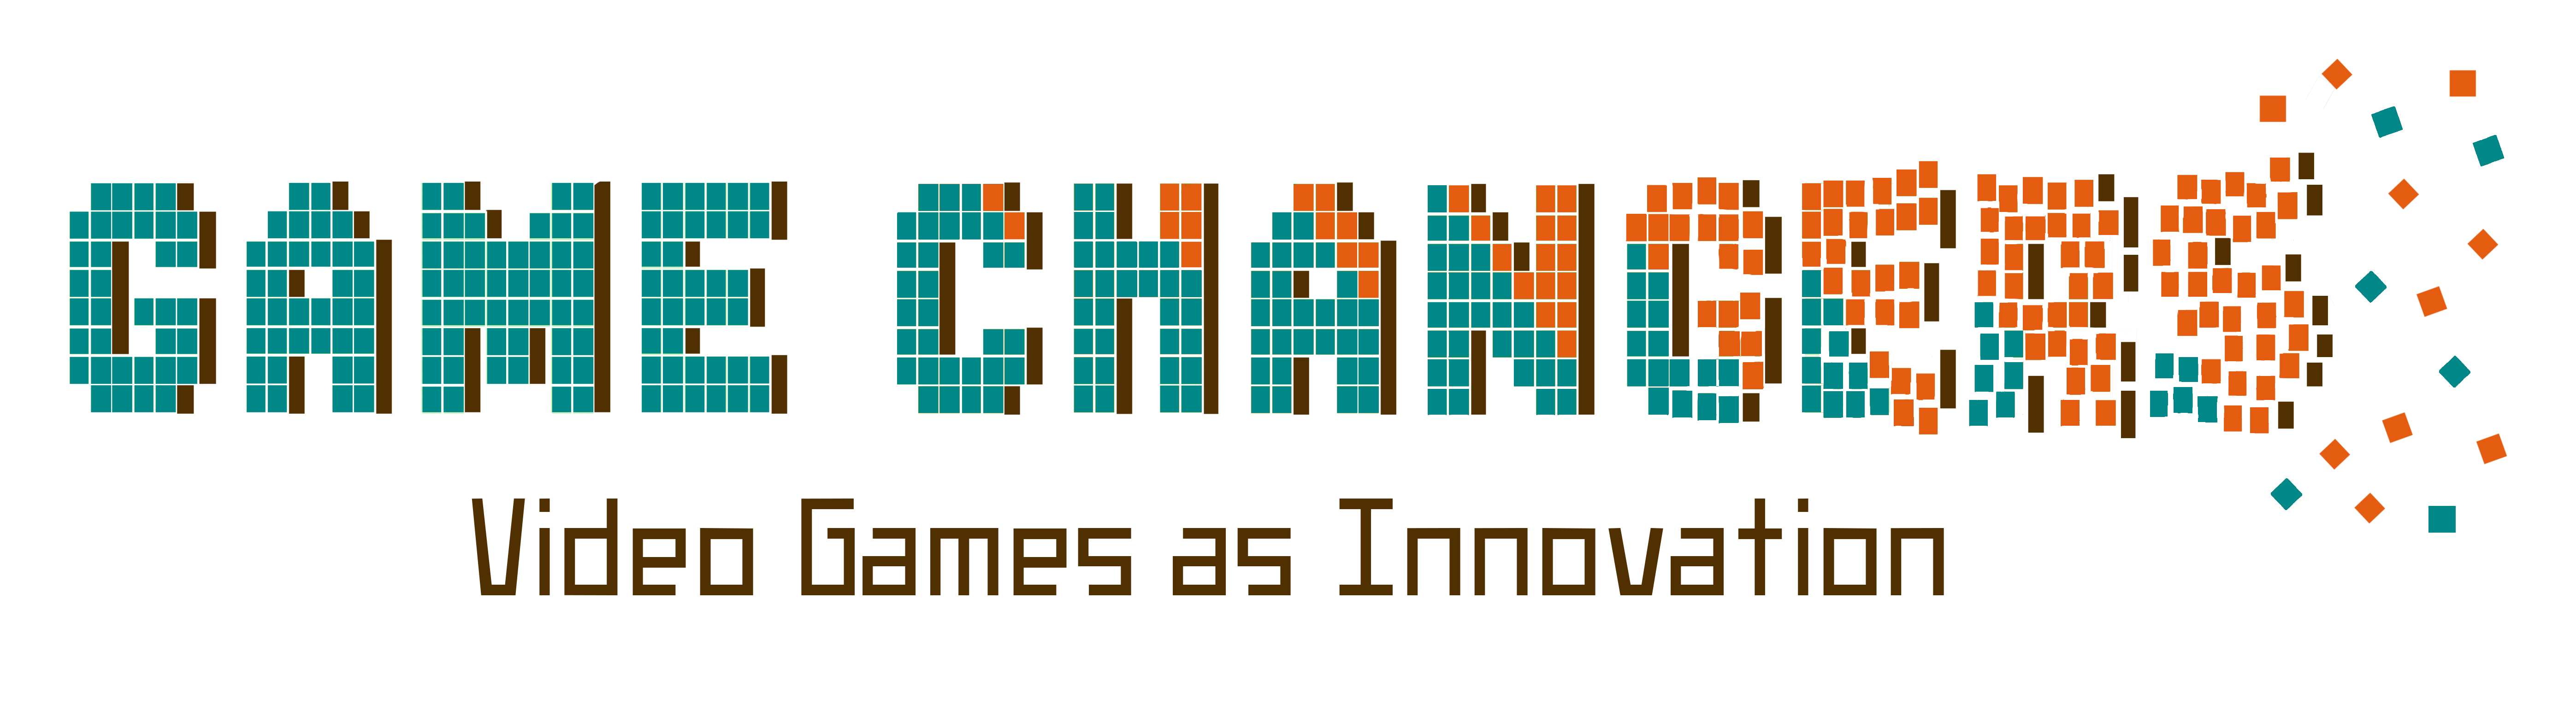 Game Changers:Video Games as Innovation